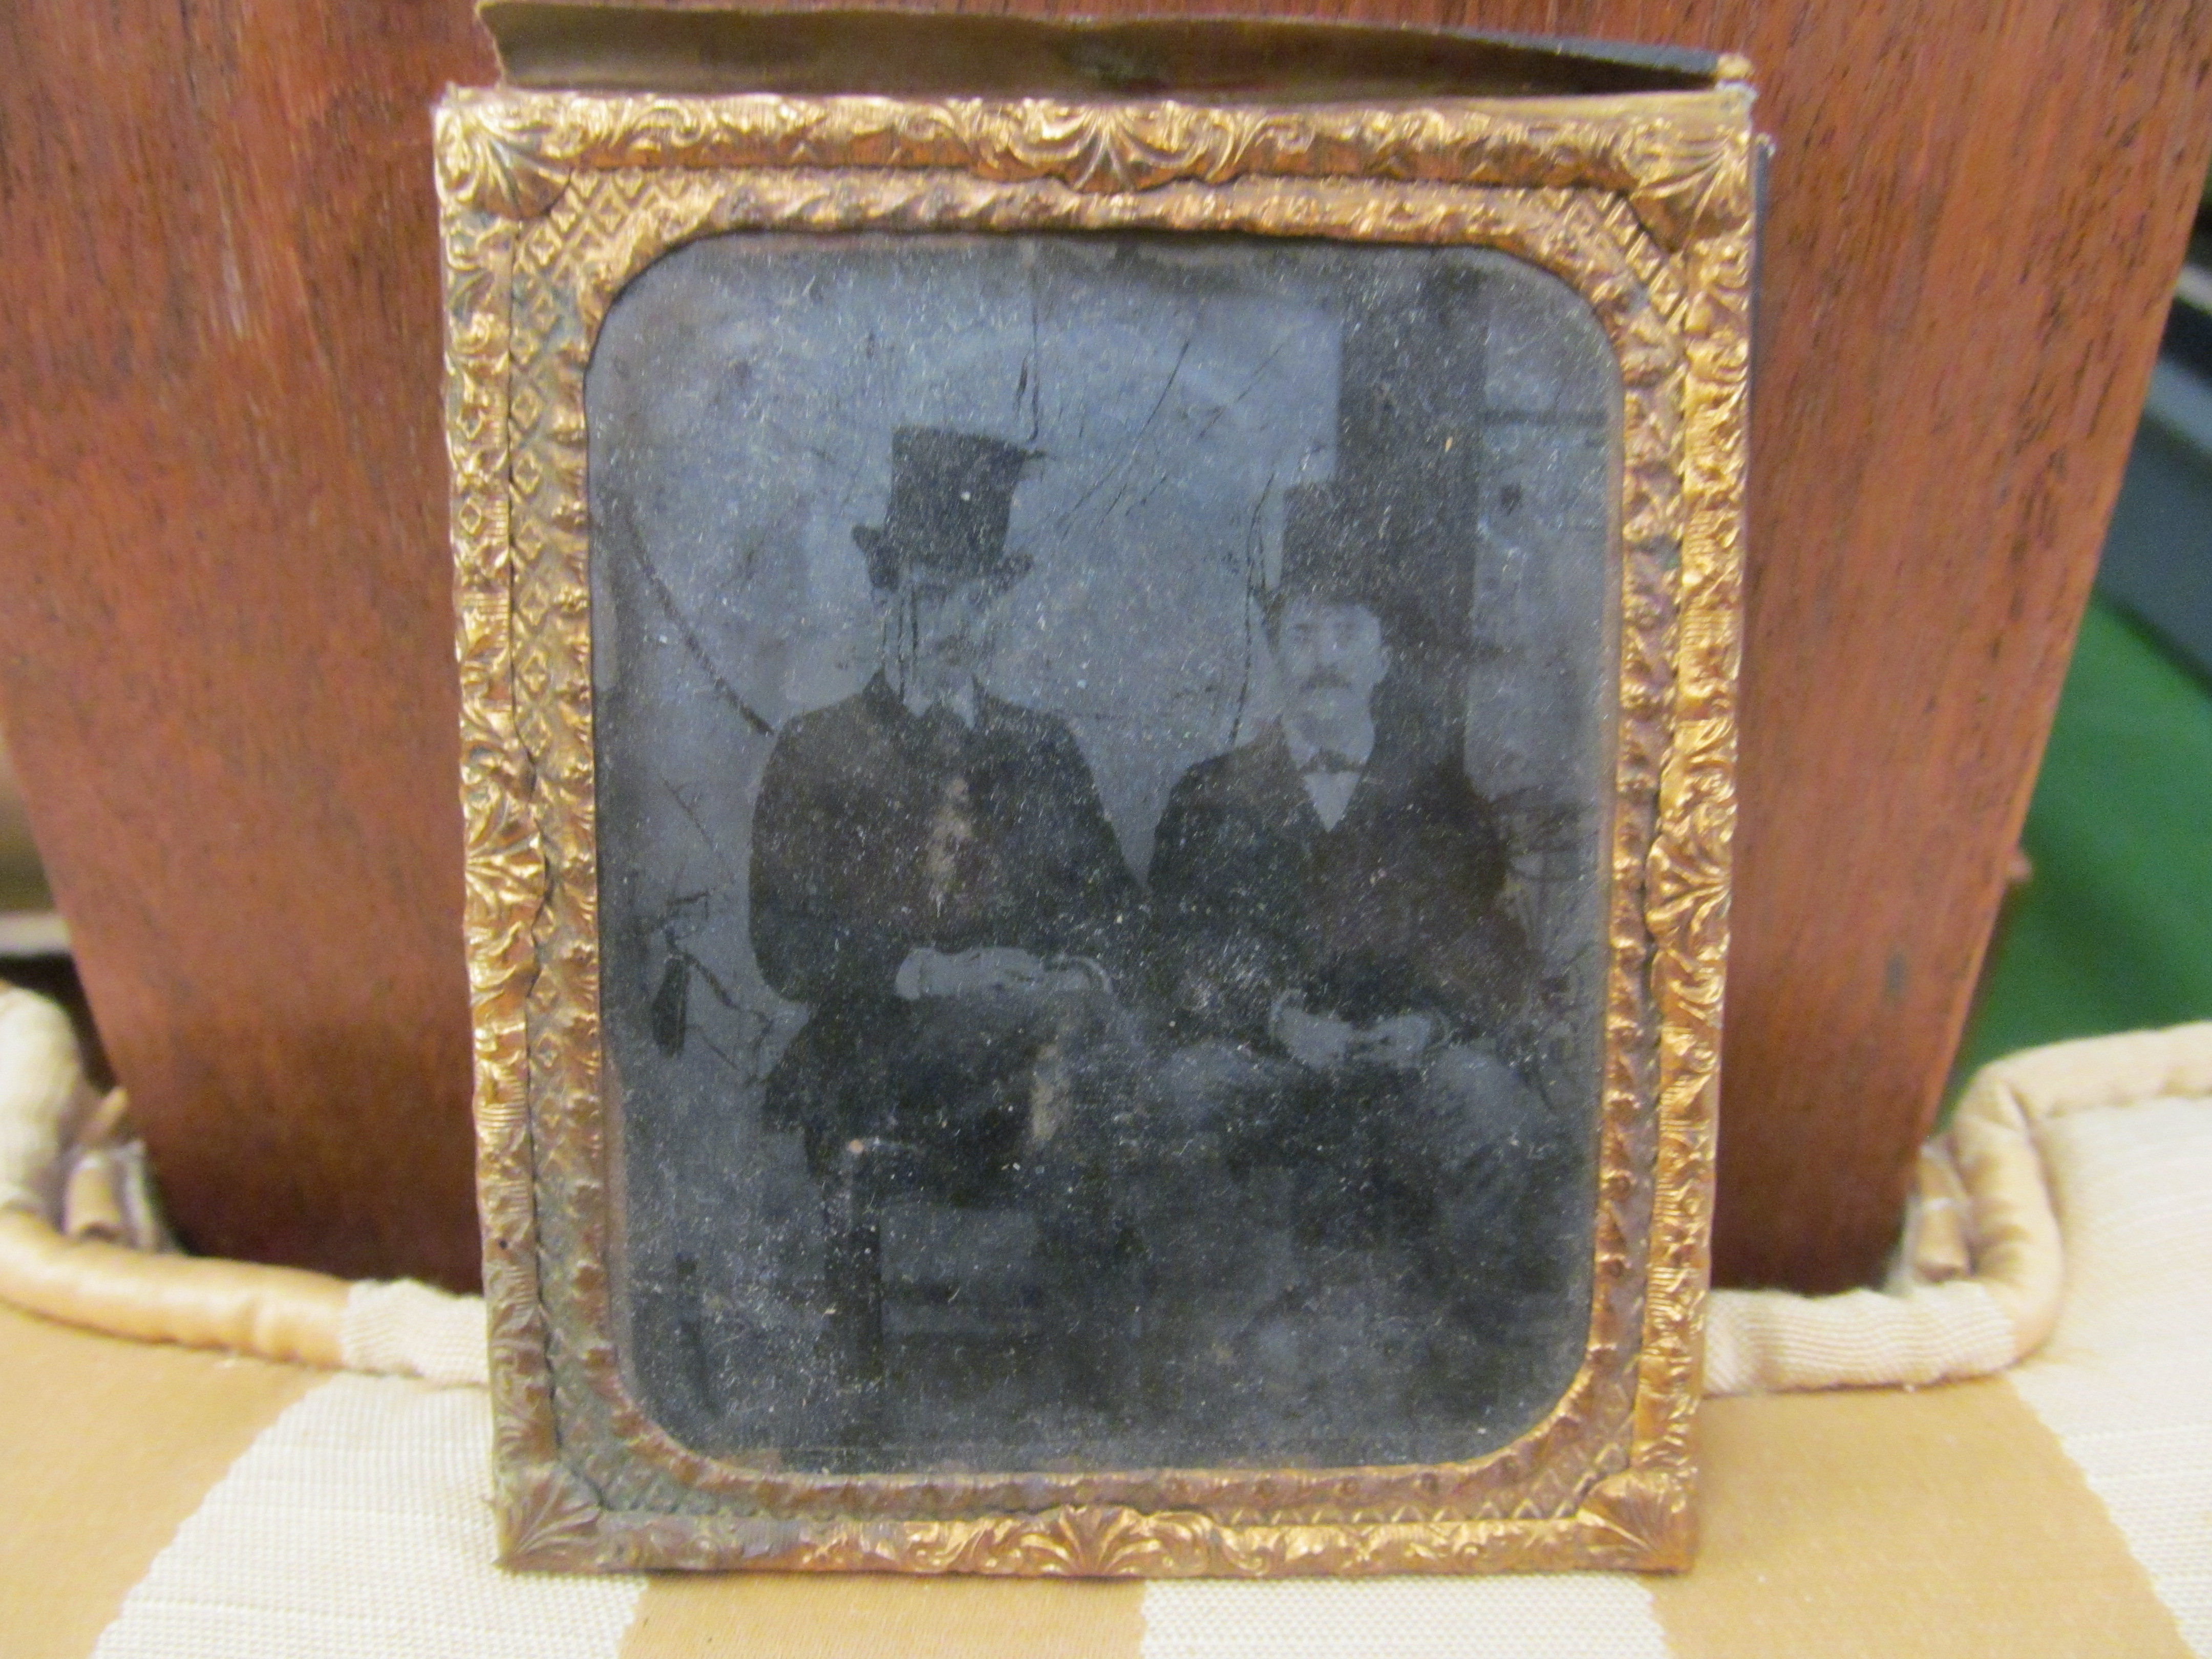 Some daguerrotypres and ambrotypes